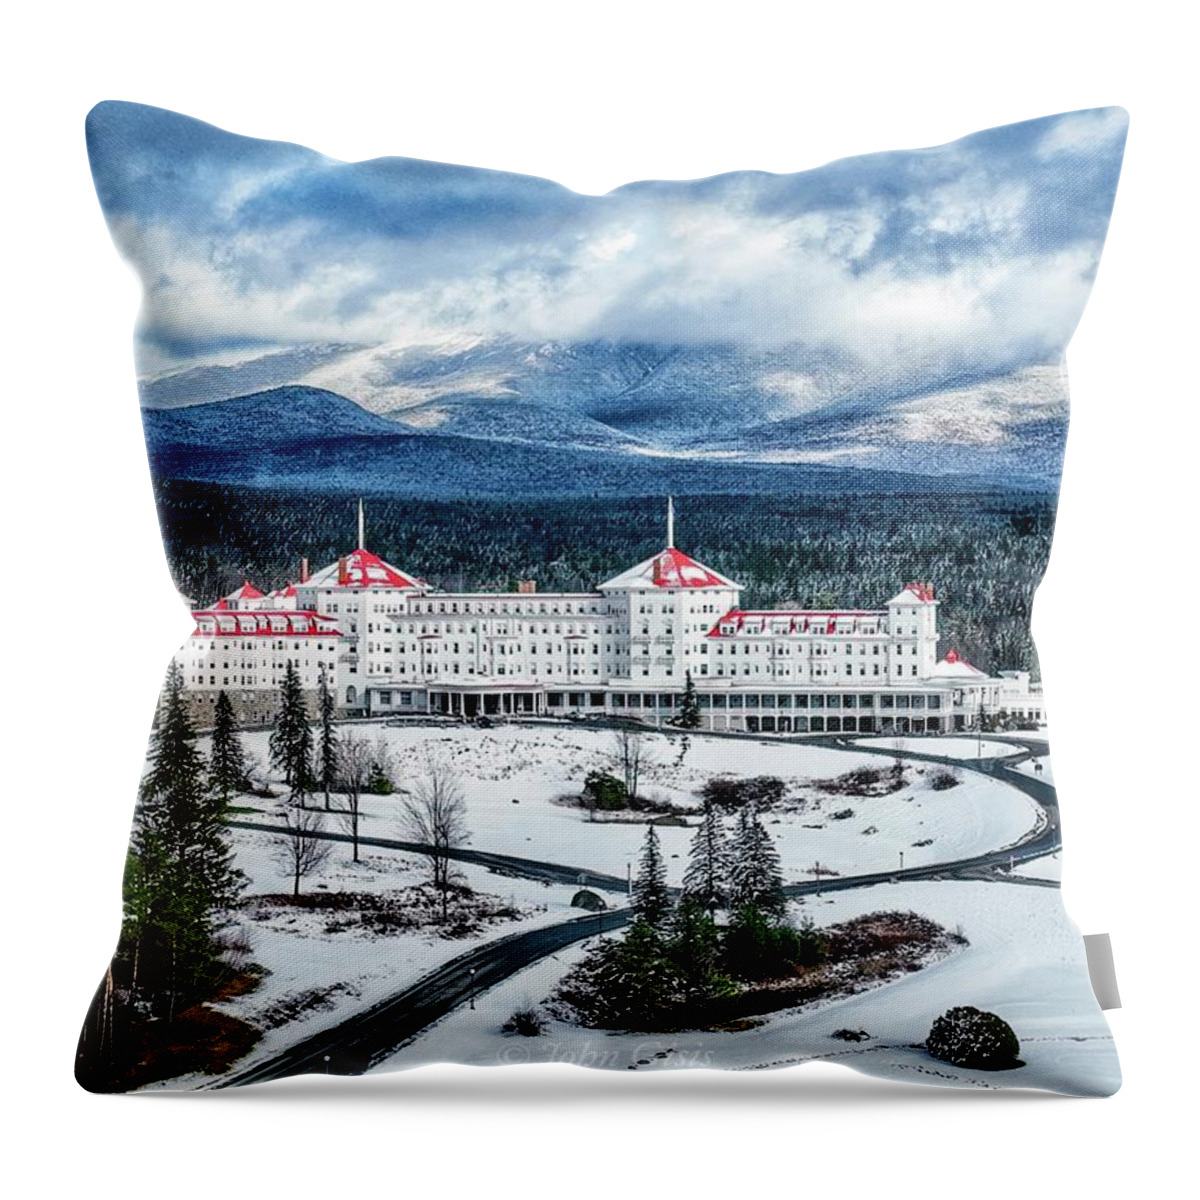  Throw Pillow featuring the photograph Bretton Woods #5 by John Gisis